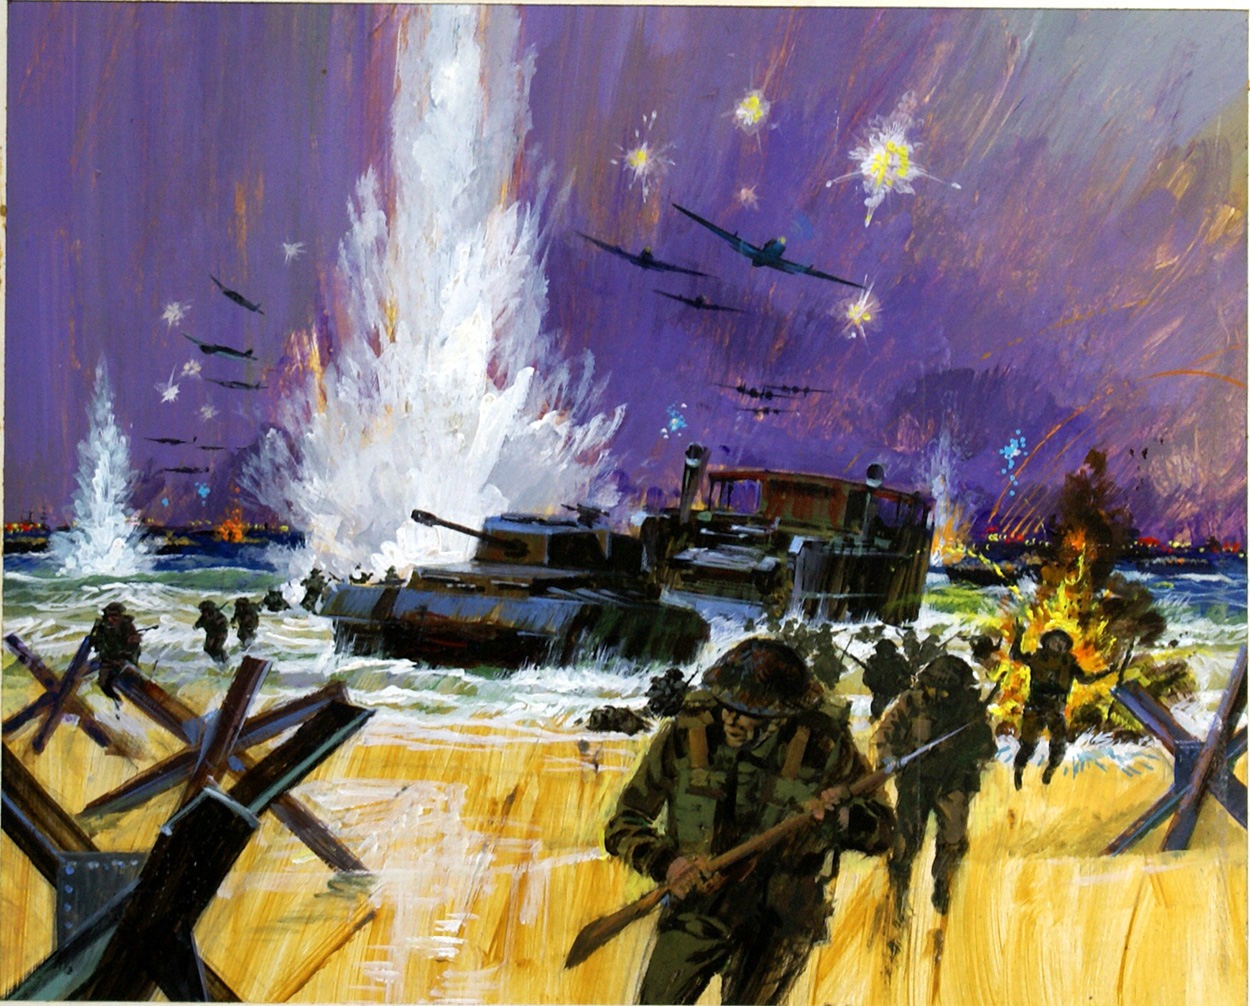 D Day Landing 6th June 1944 (Original) art by Other Military Art (Coton) at The Illustration Art Gallery